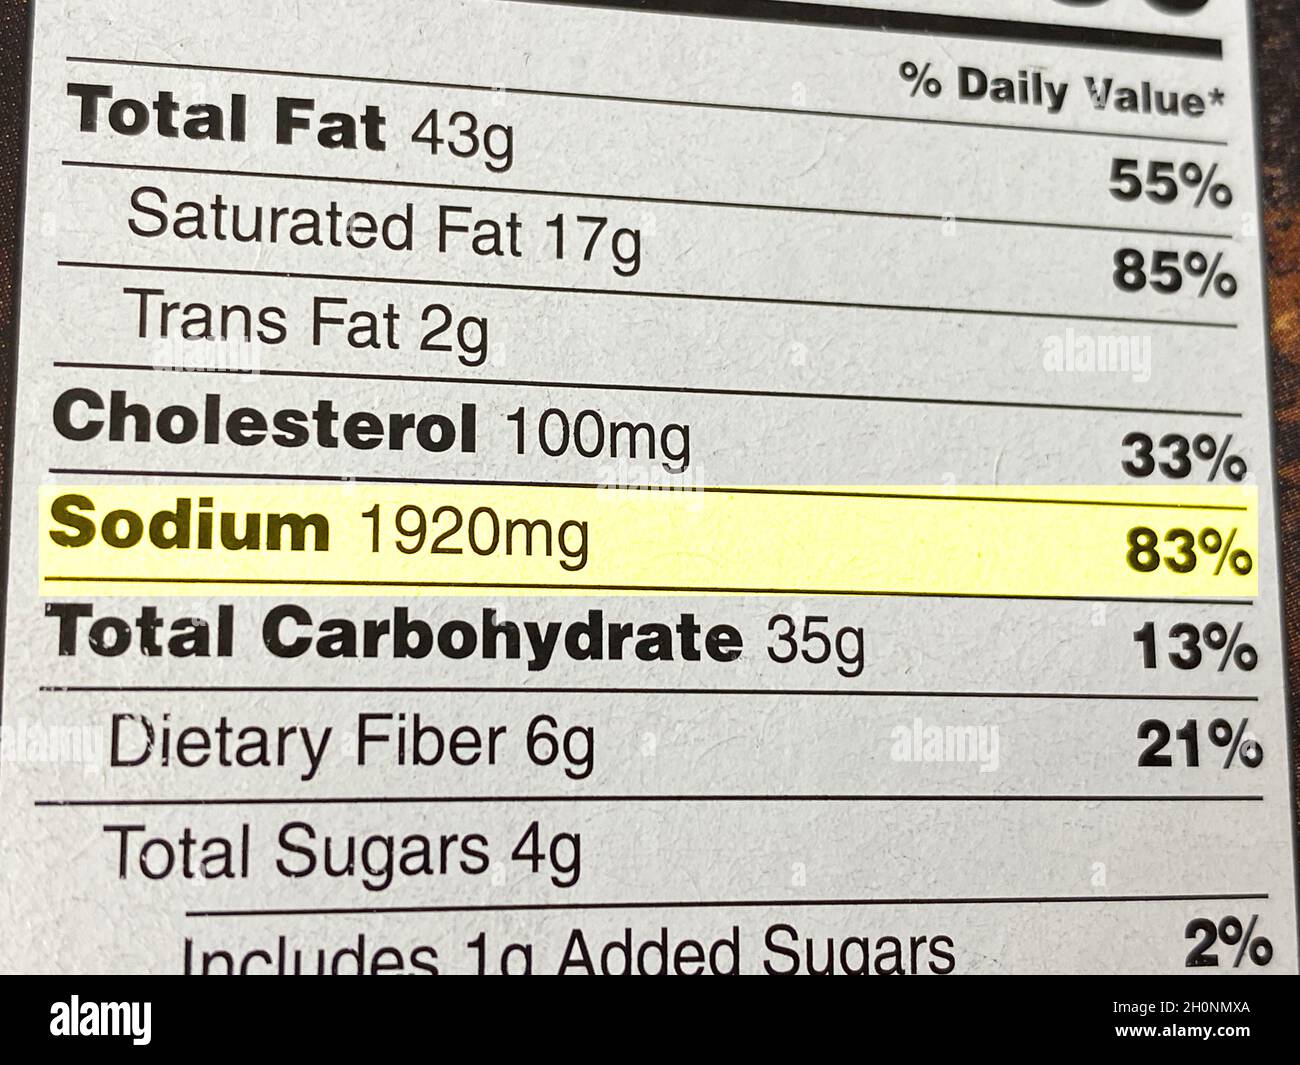 High sodium content highlighted on a nutrition label. The FDA wants food manufacturers to cut back on sodium as Americans are eating too much salt. Stock Photo